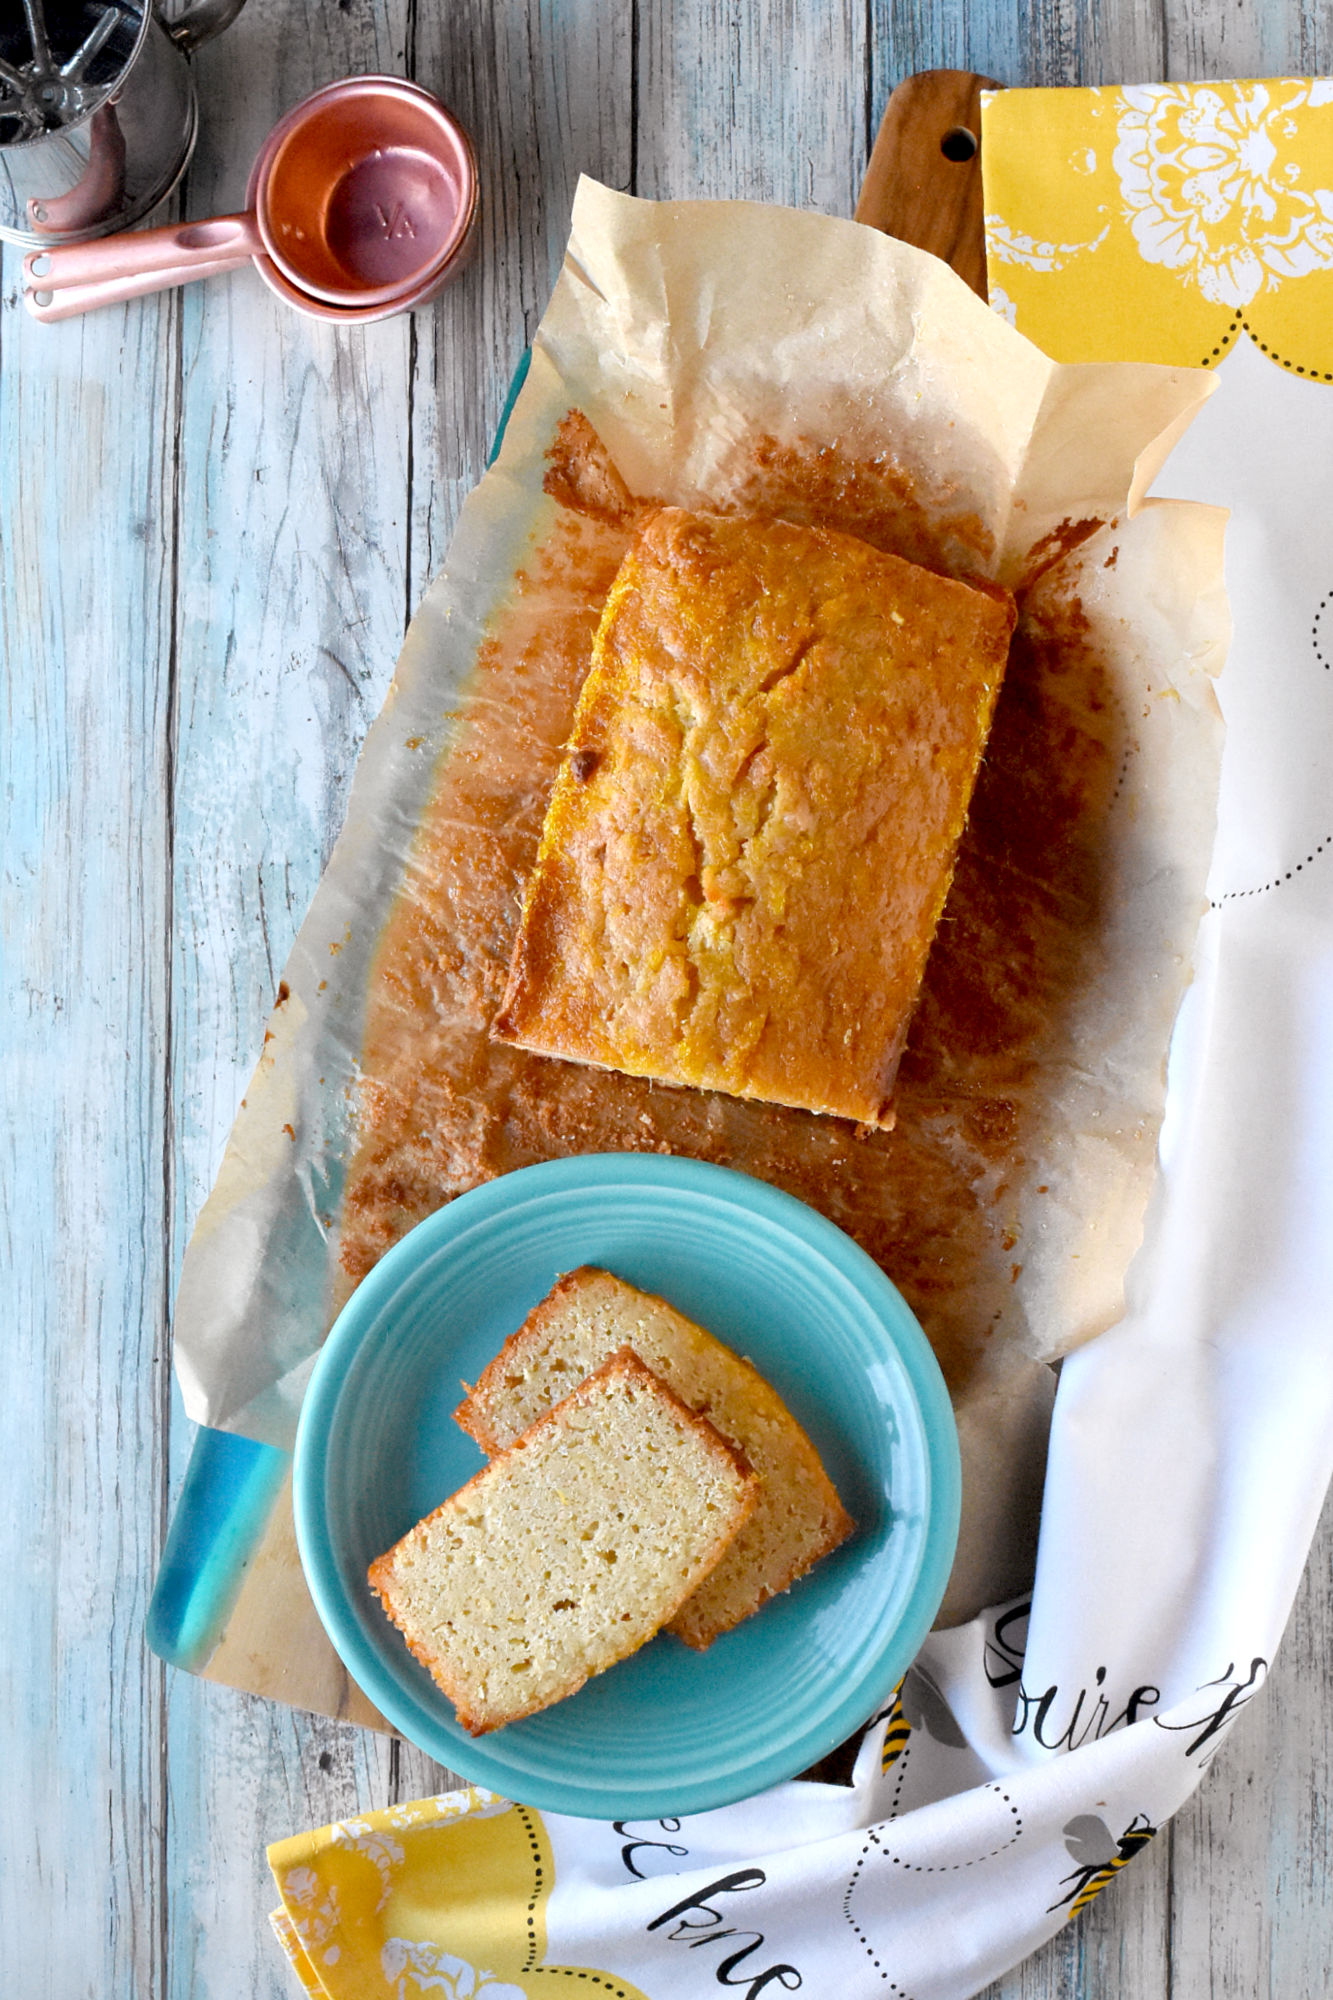 Indulge in a burst of tangy sweetness with every bite of our Moist Meyer Lemon Loaf ???? Perfect for a summer picnic or an afternoon treat. #SpringSweetsWeek #MeyerLemonLove #CitrusSweets #MoistandDelicious #BakingGoals #LusciousLoaf
